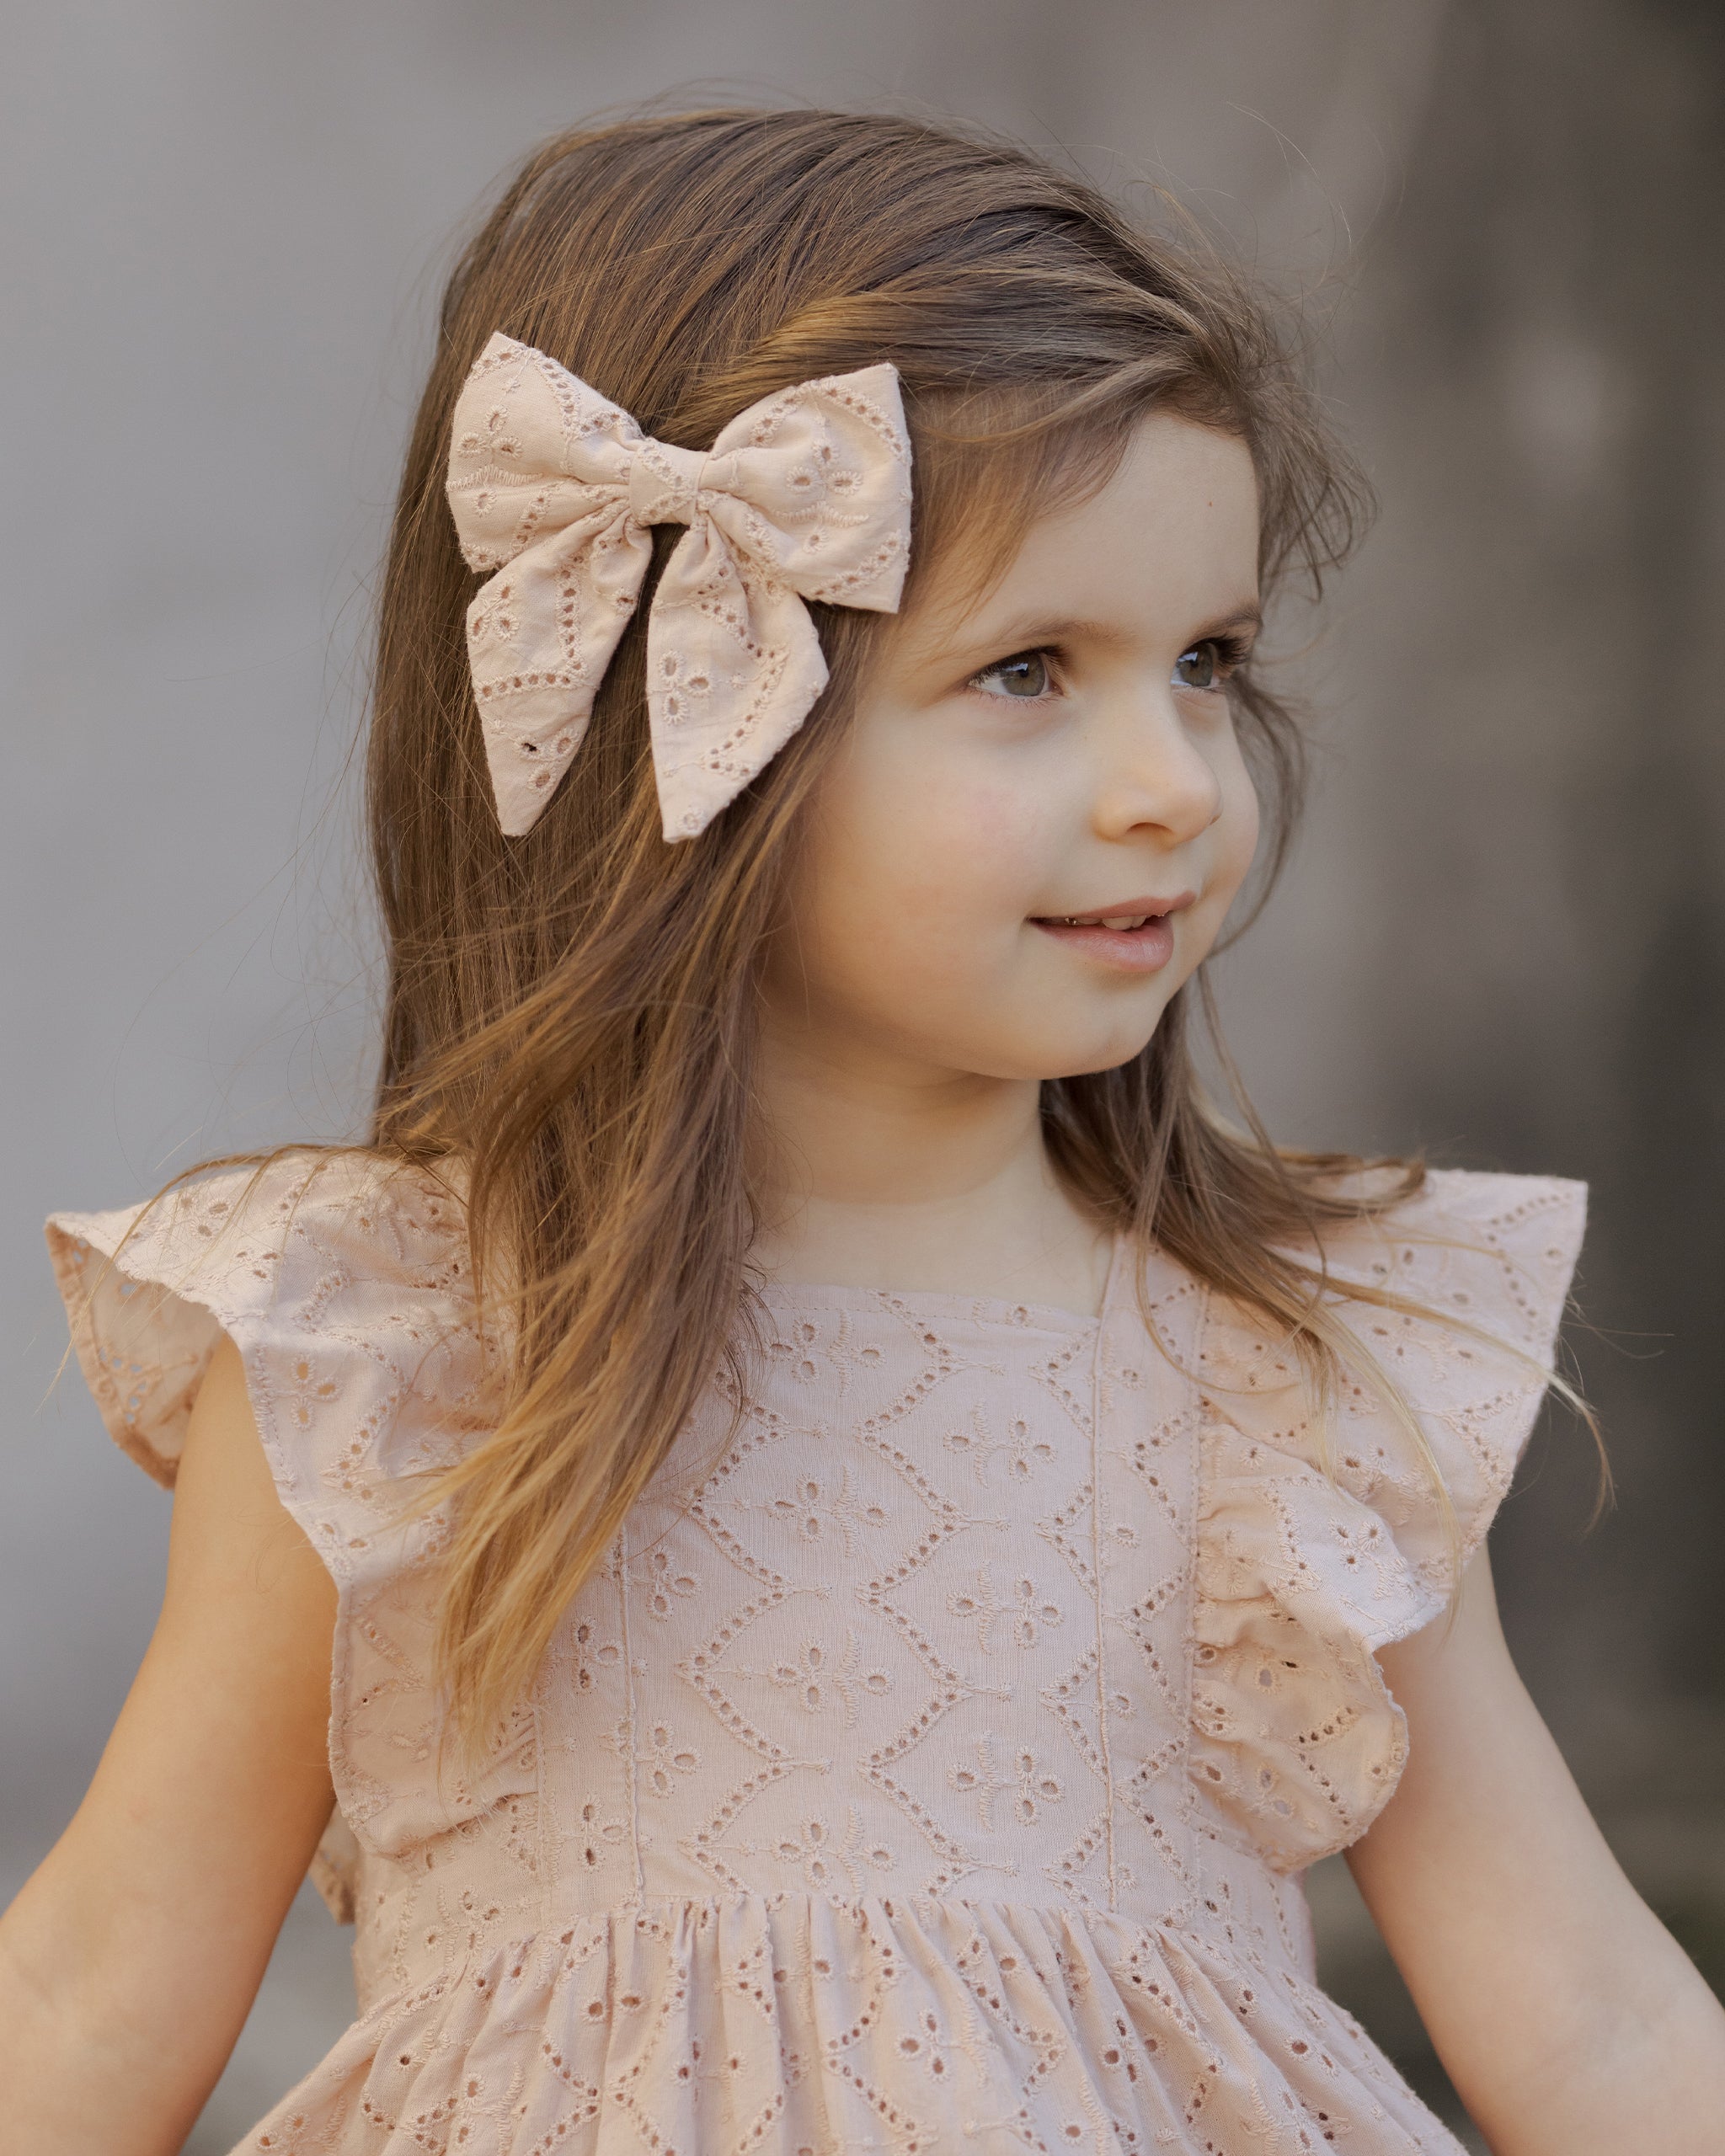 Sailor Bow || Rose - Rylee + Cru | Kids Clothes | Trendy Baby Clothes | Modern Infant Outfits |